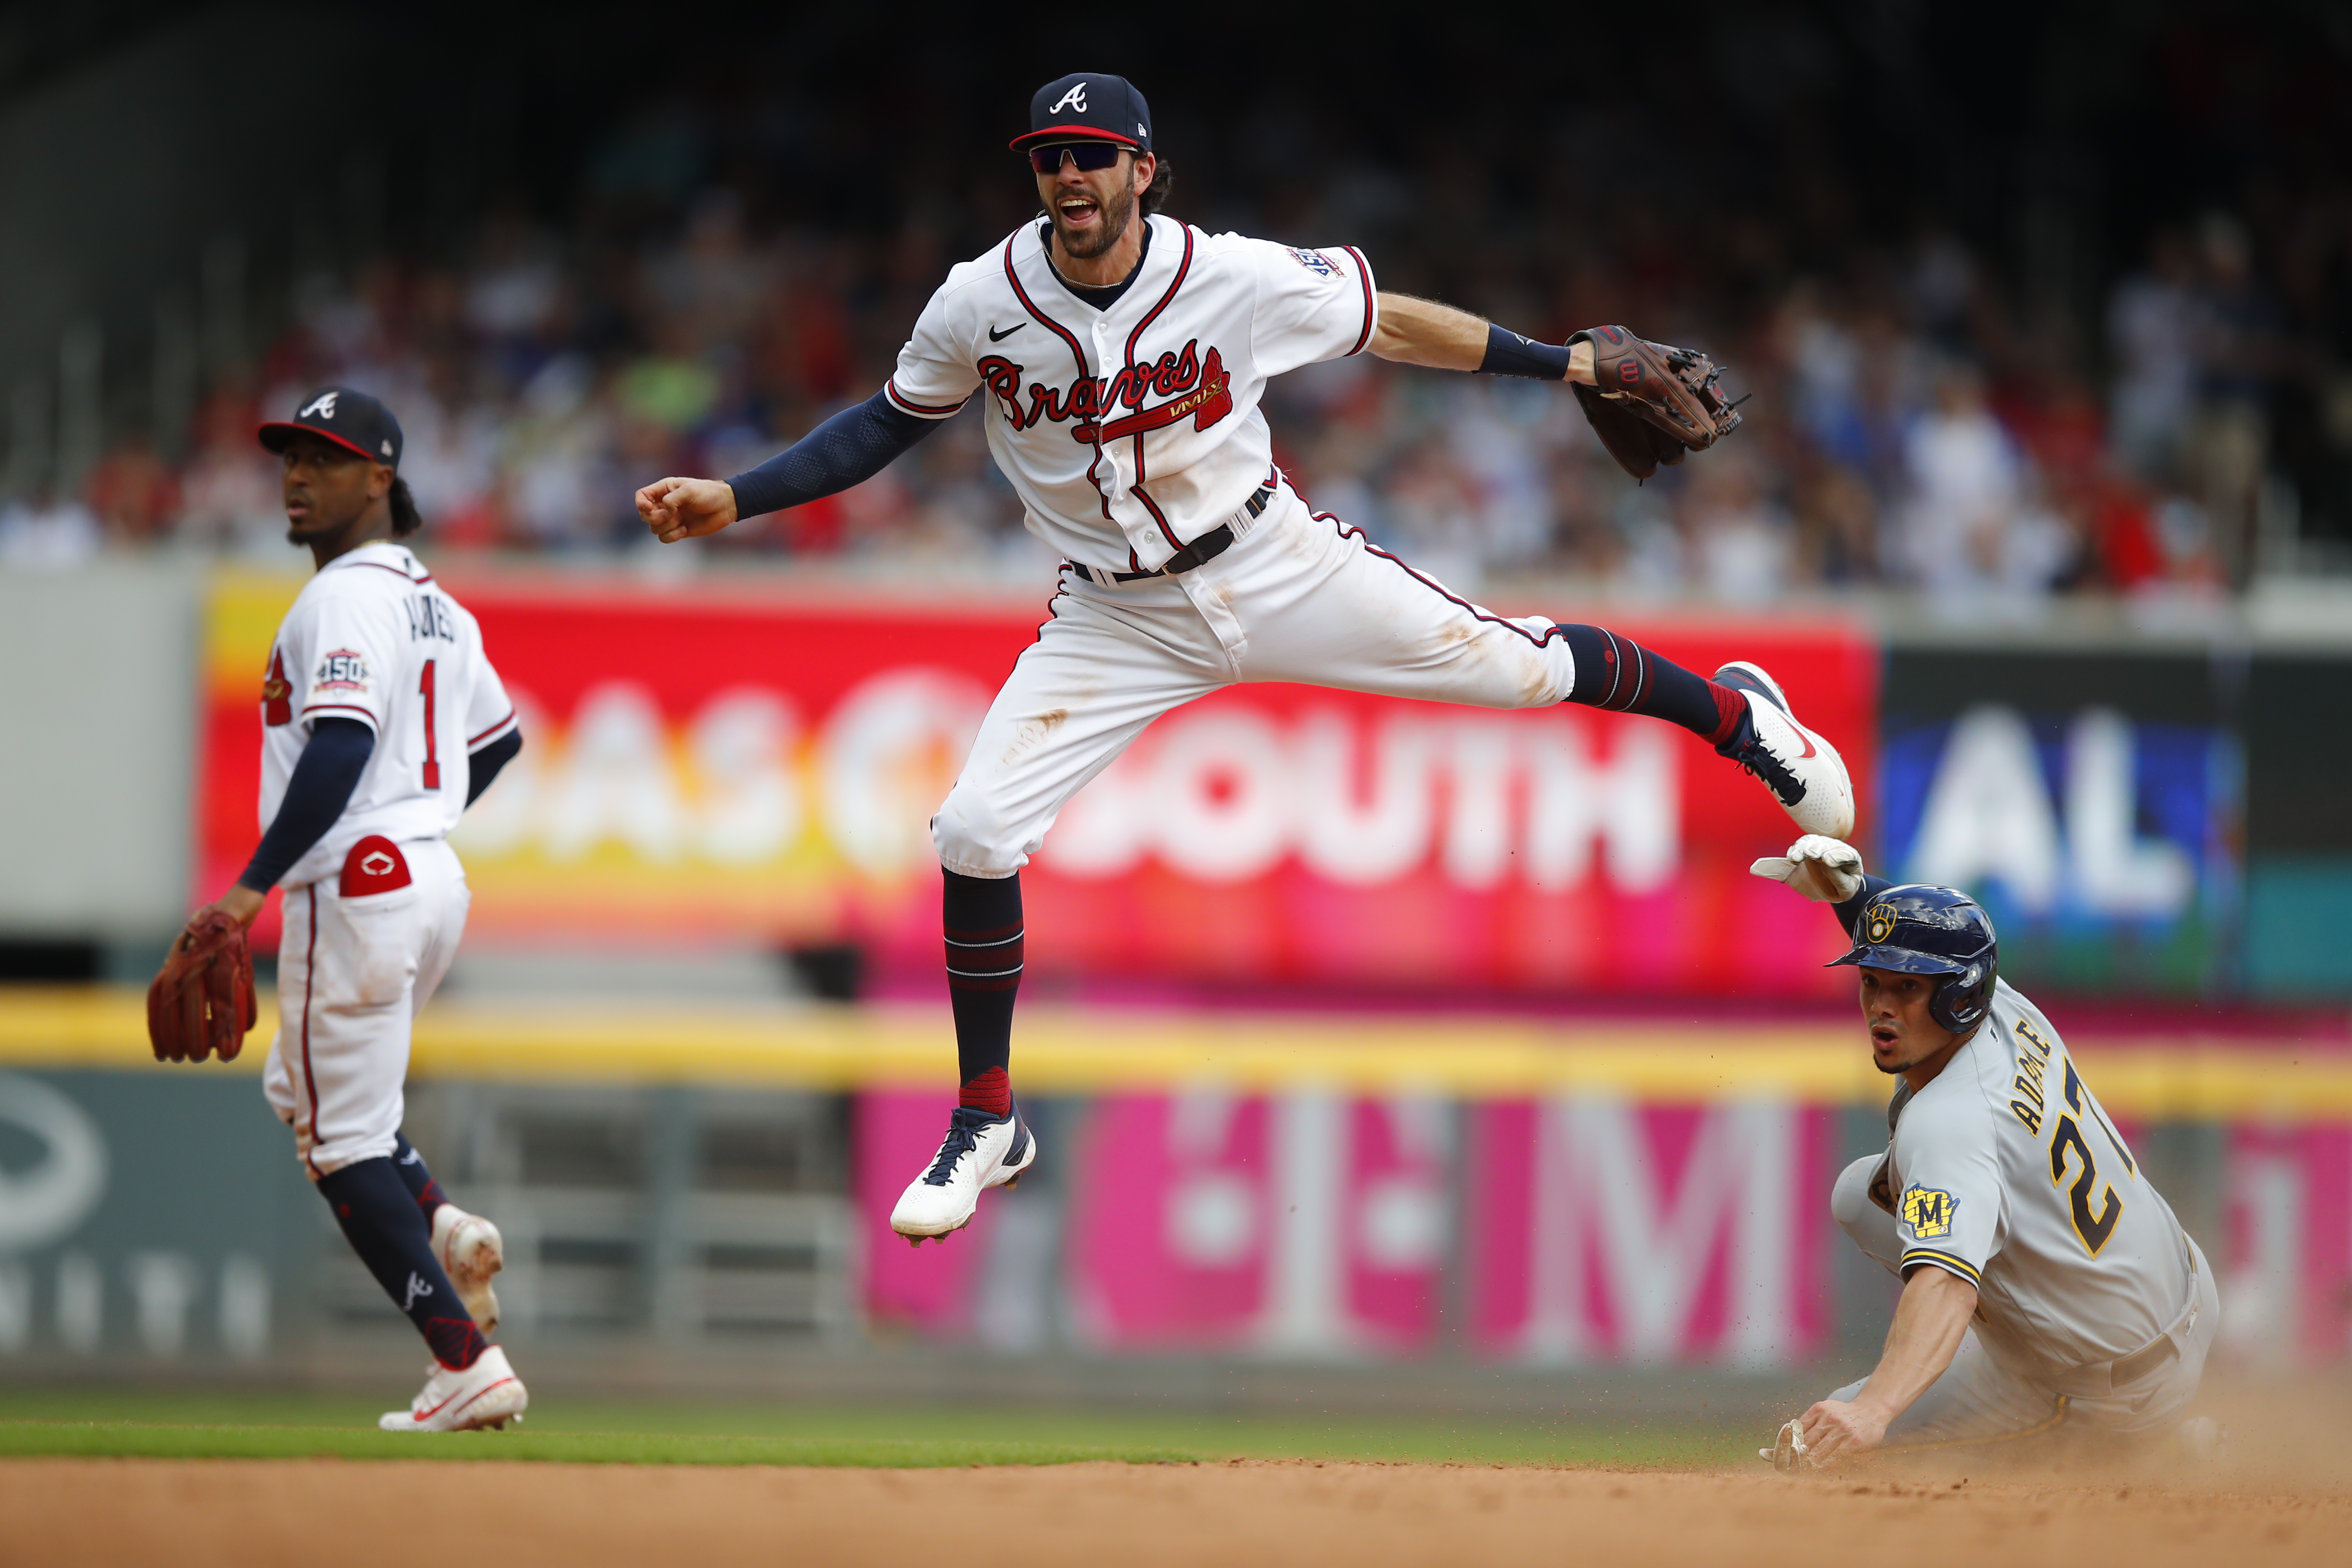 Pearl power: Pederson HR gives Braves 3-0 win, series lead over Brewers –  WSB-TV Channel 2 - Atlanta